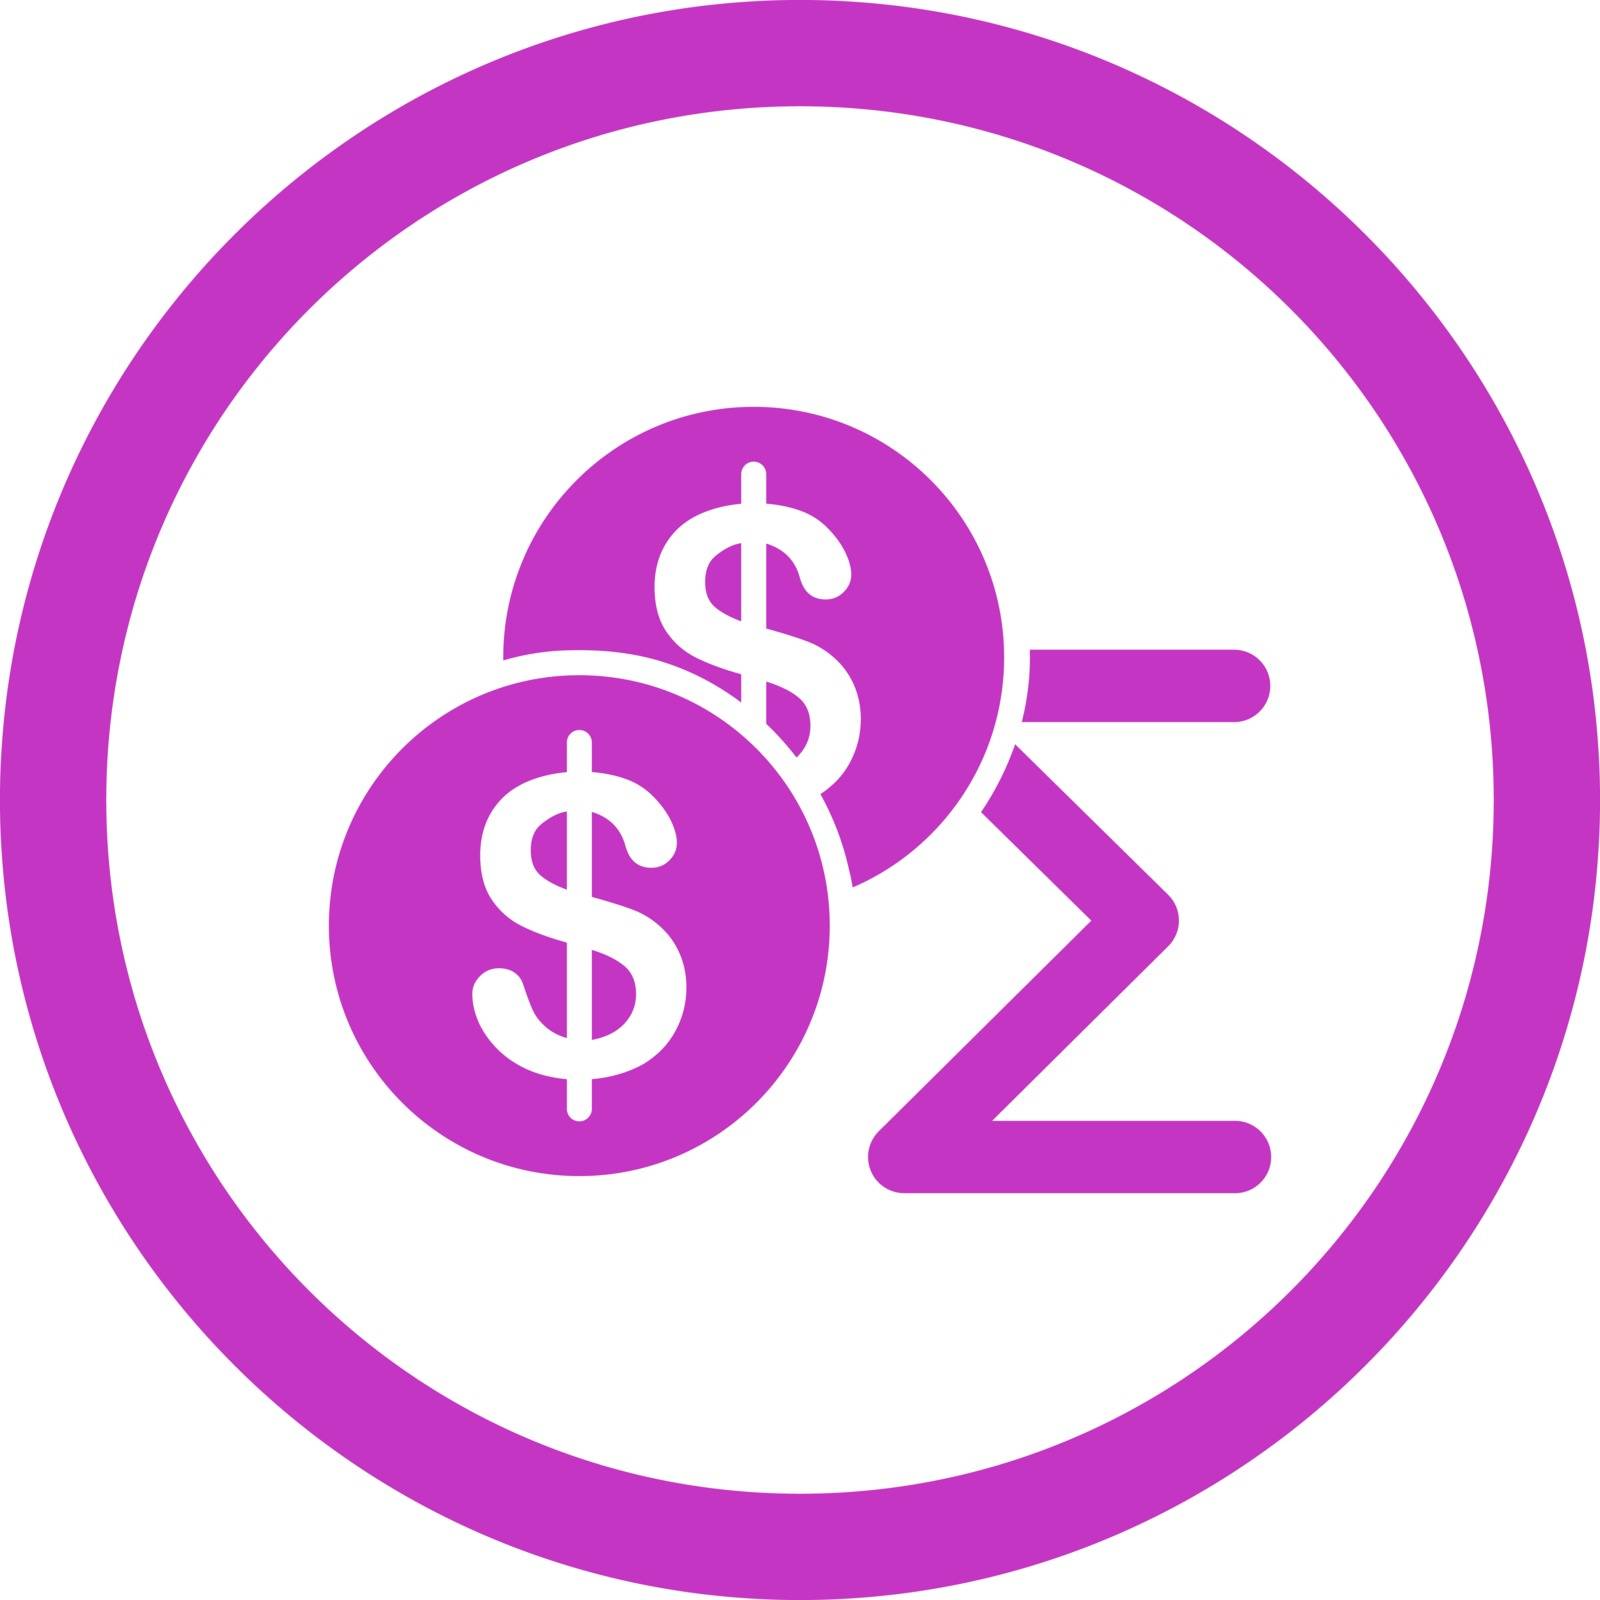 Summary vector icon. This flat rounded symbol uses violet color and isolated on a white background.